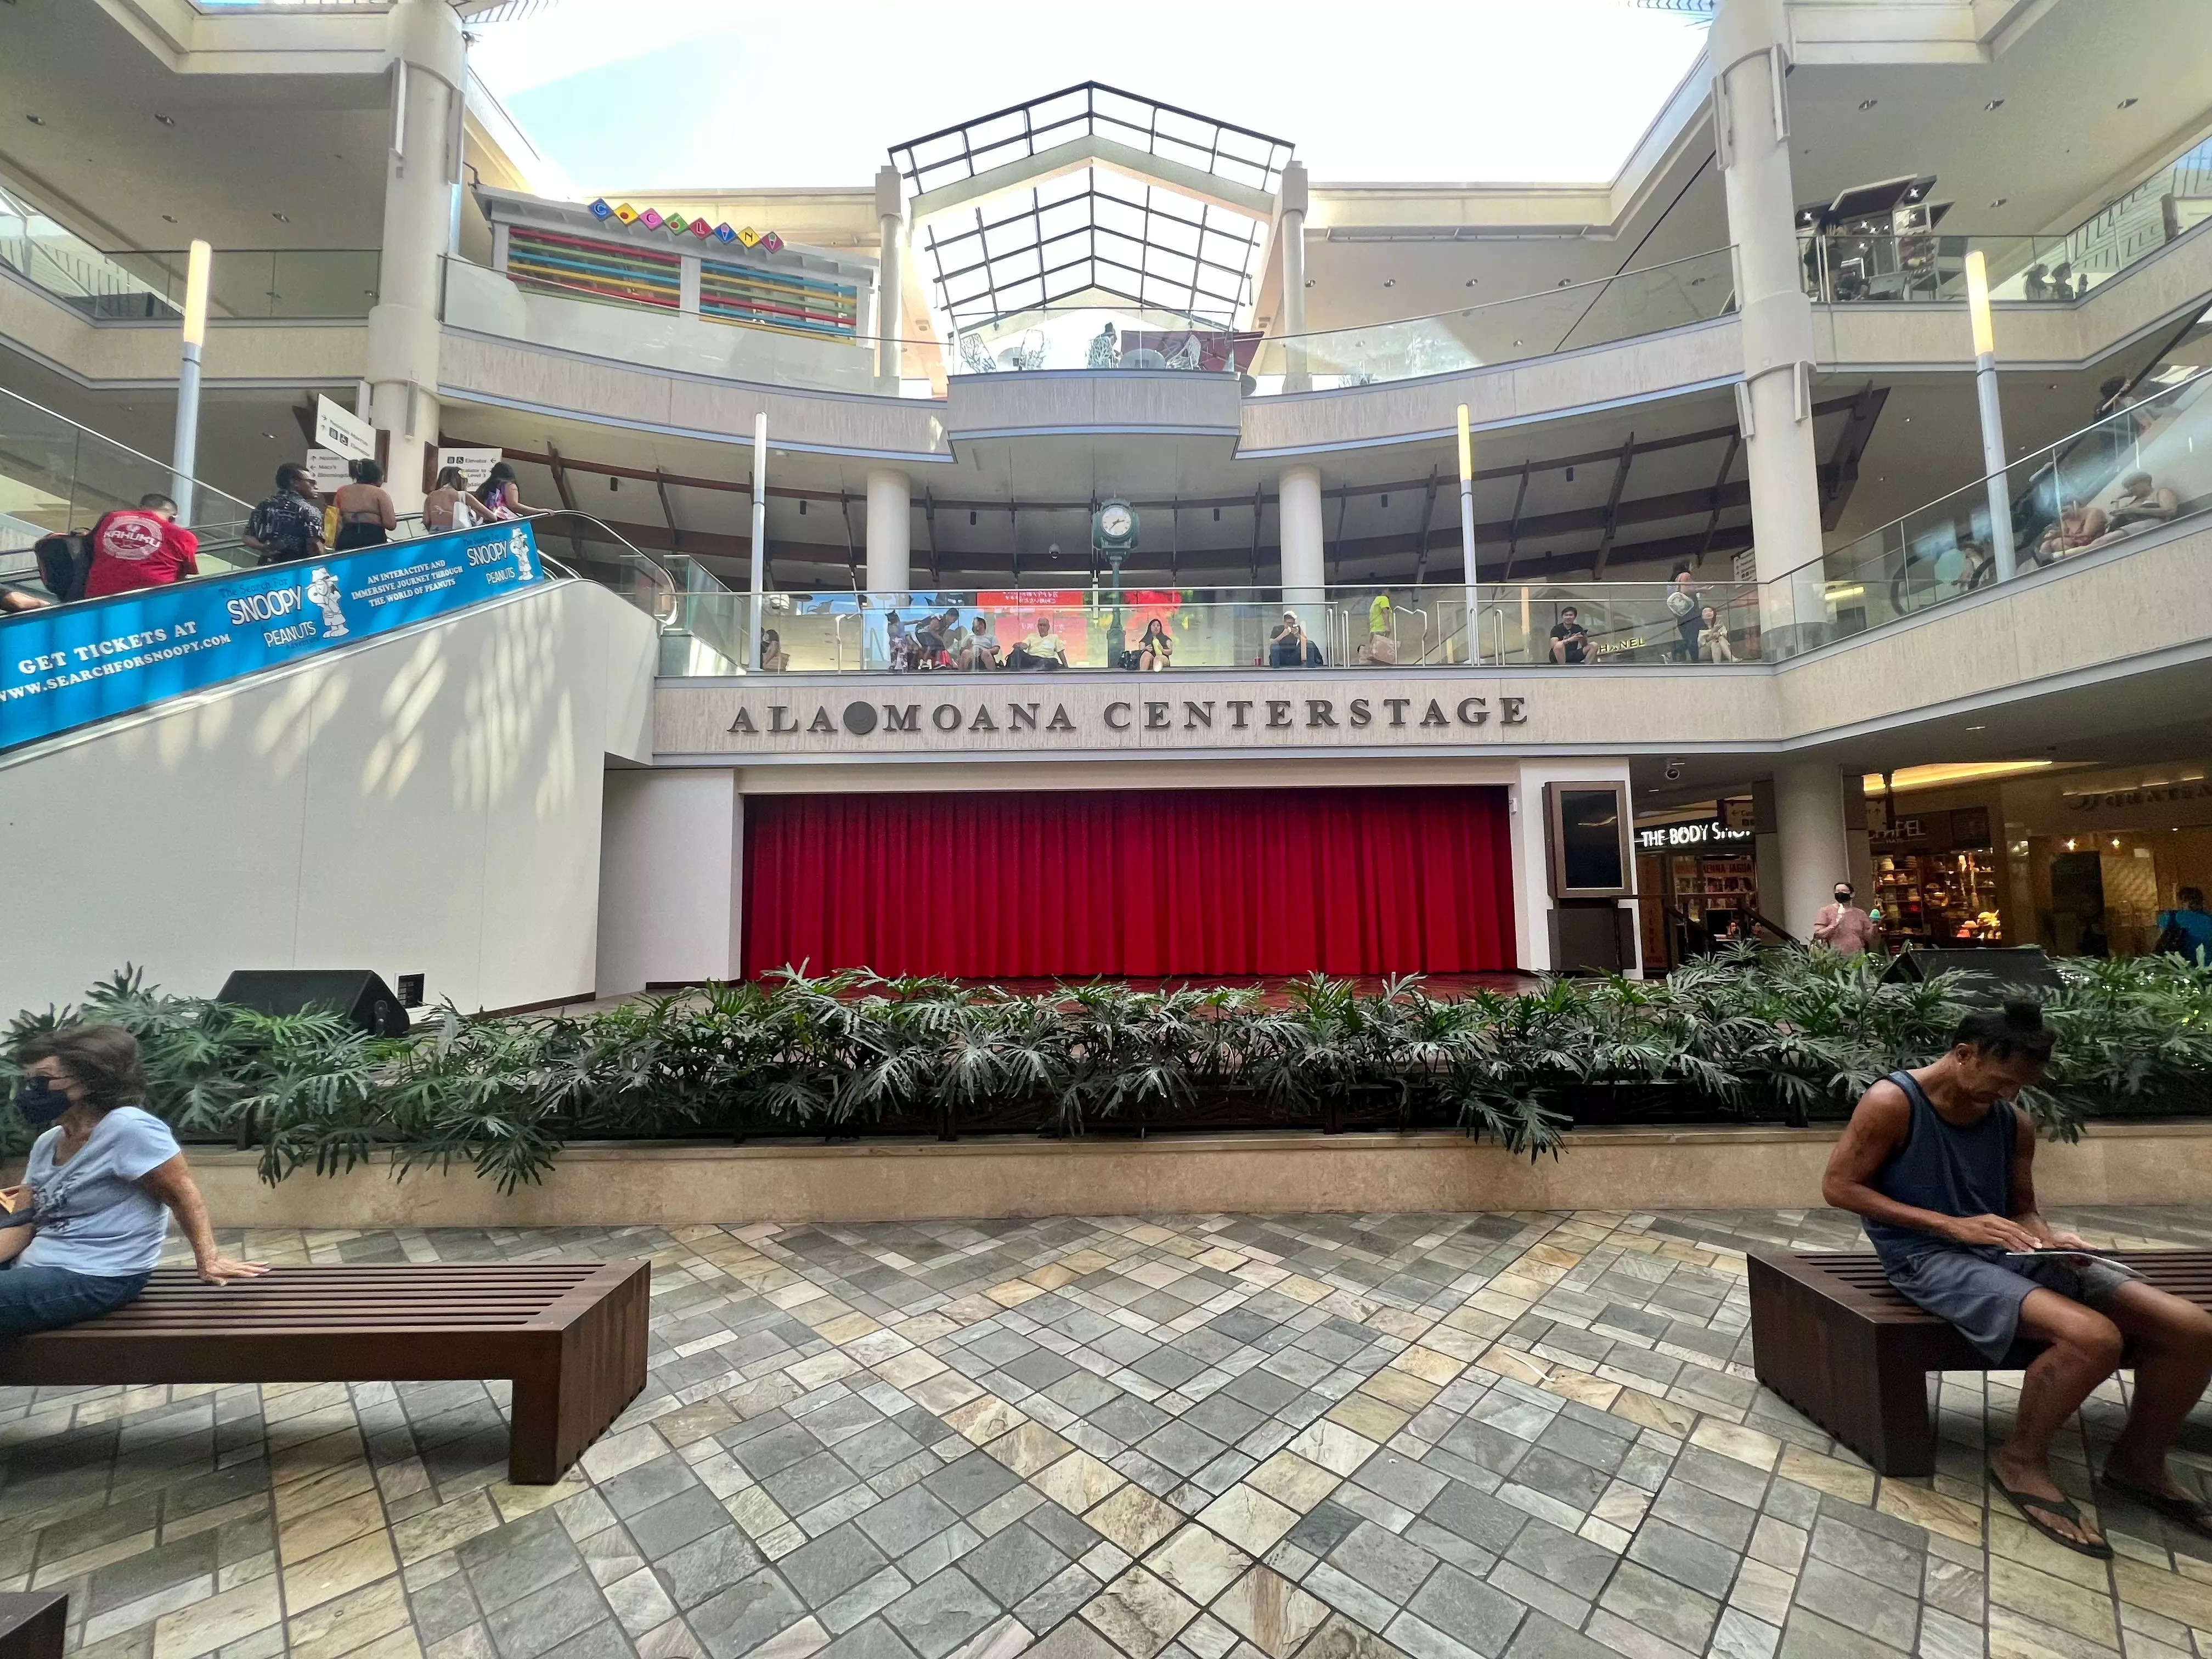 I visited the world's largest open-air shopping mall in Hawaii